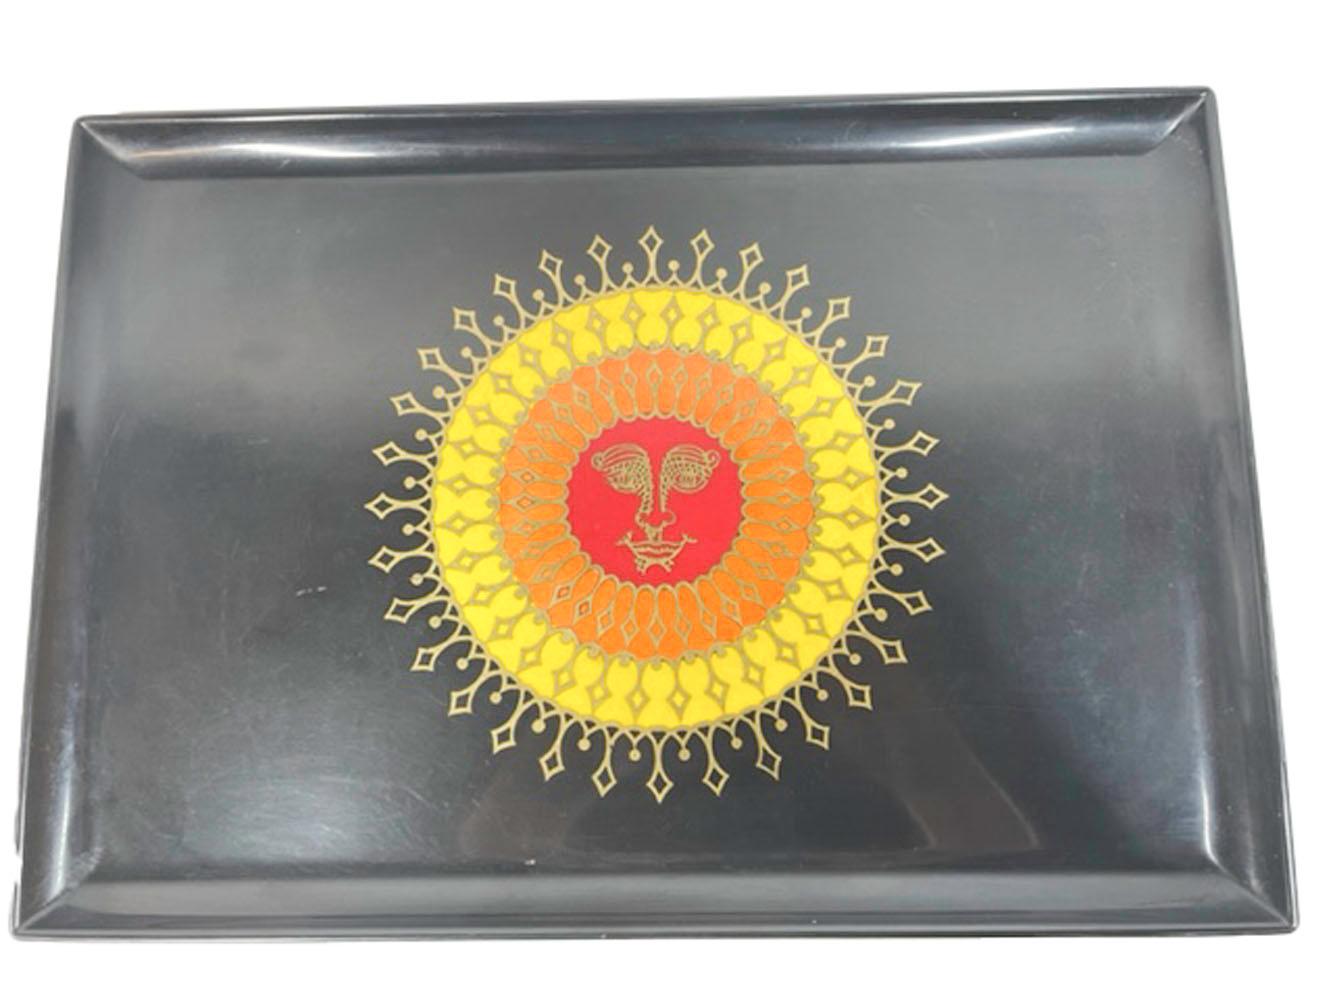 Vintage Couroc Serving Tray, W/ Red, Orange & Yellow Resin and Brass Inlaid Sun In Good Condition For Sale In Nantucket, MA